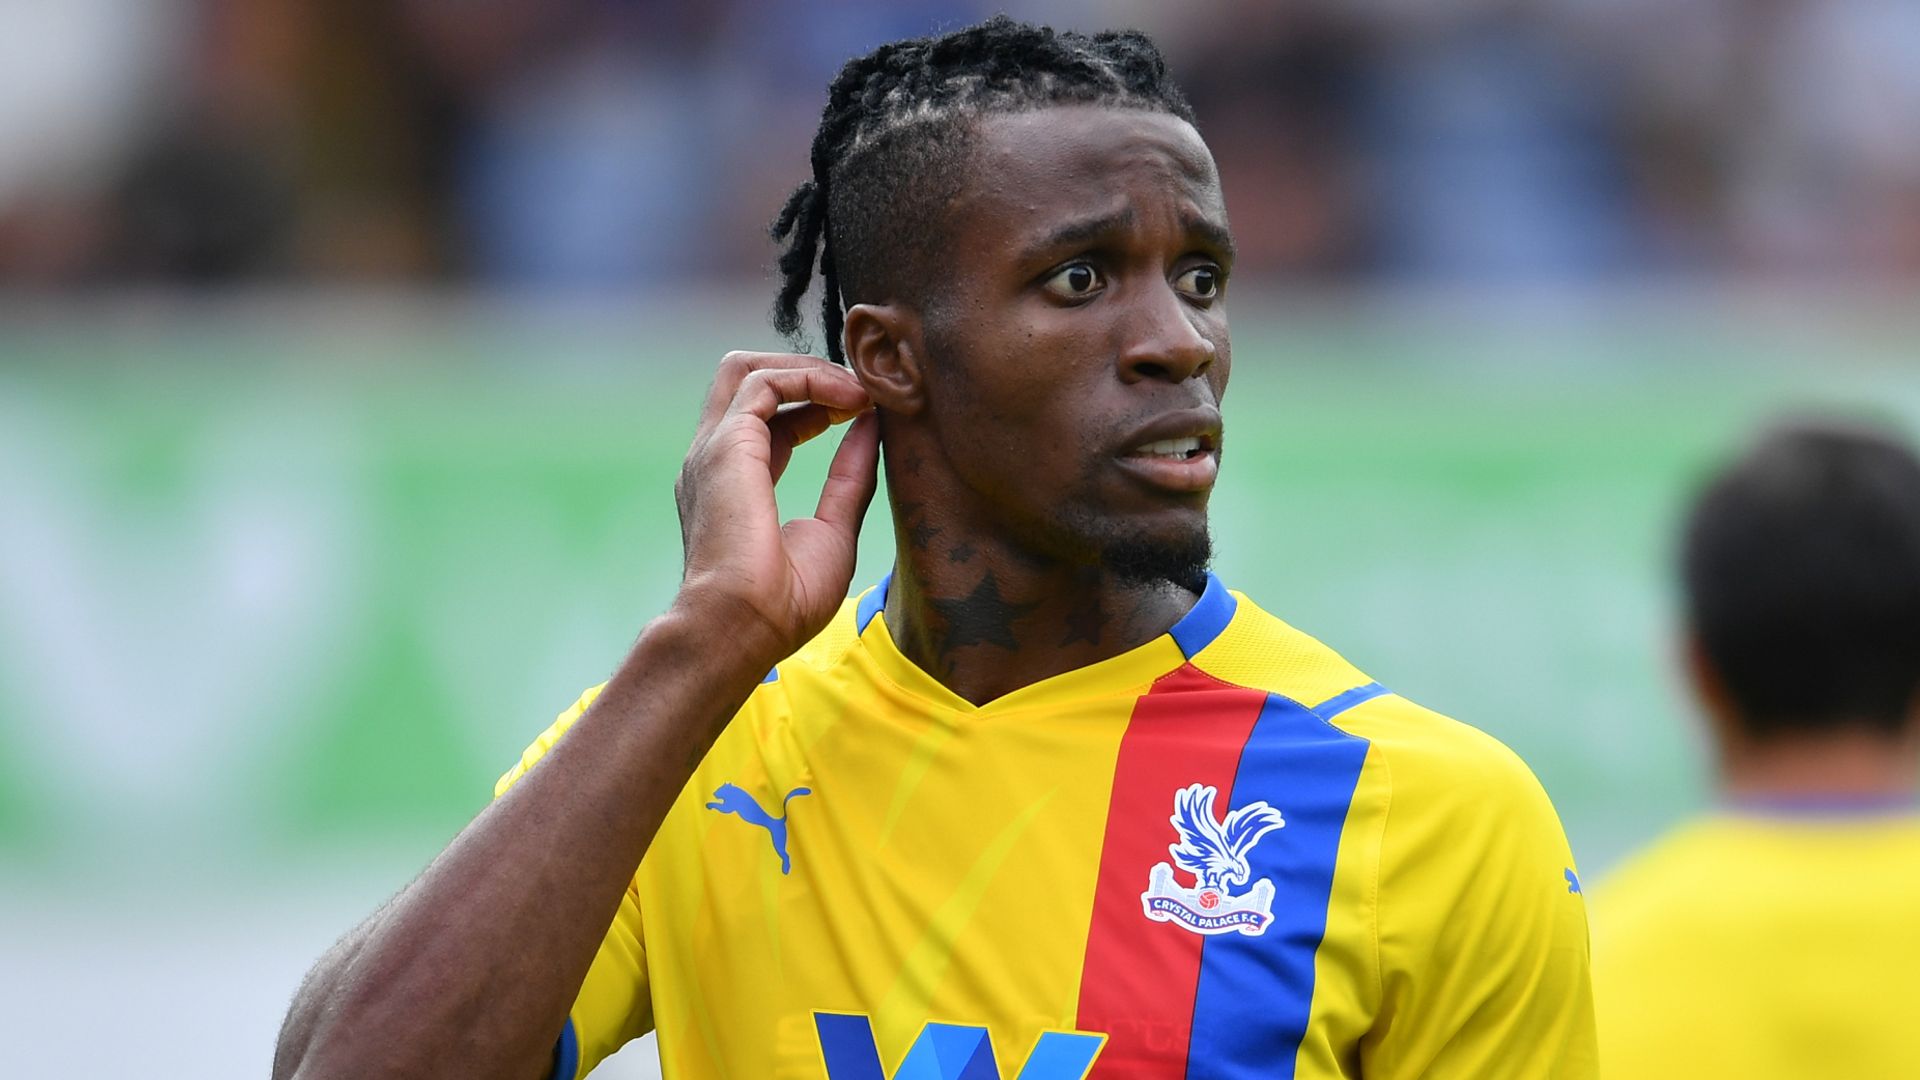 Vieira hopes Zaha will be part of exciting Palace project